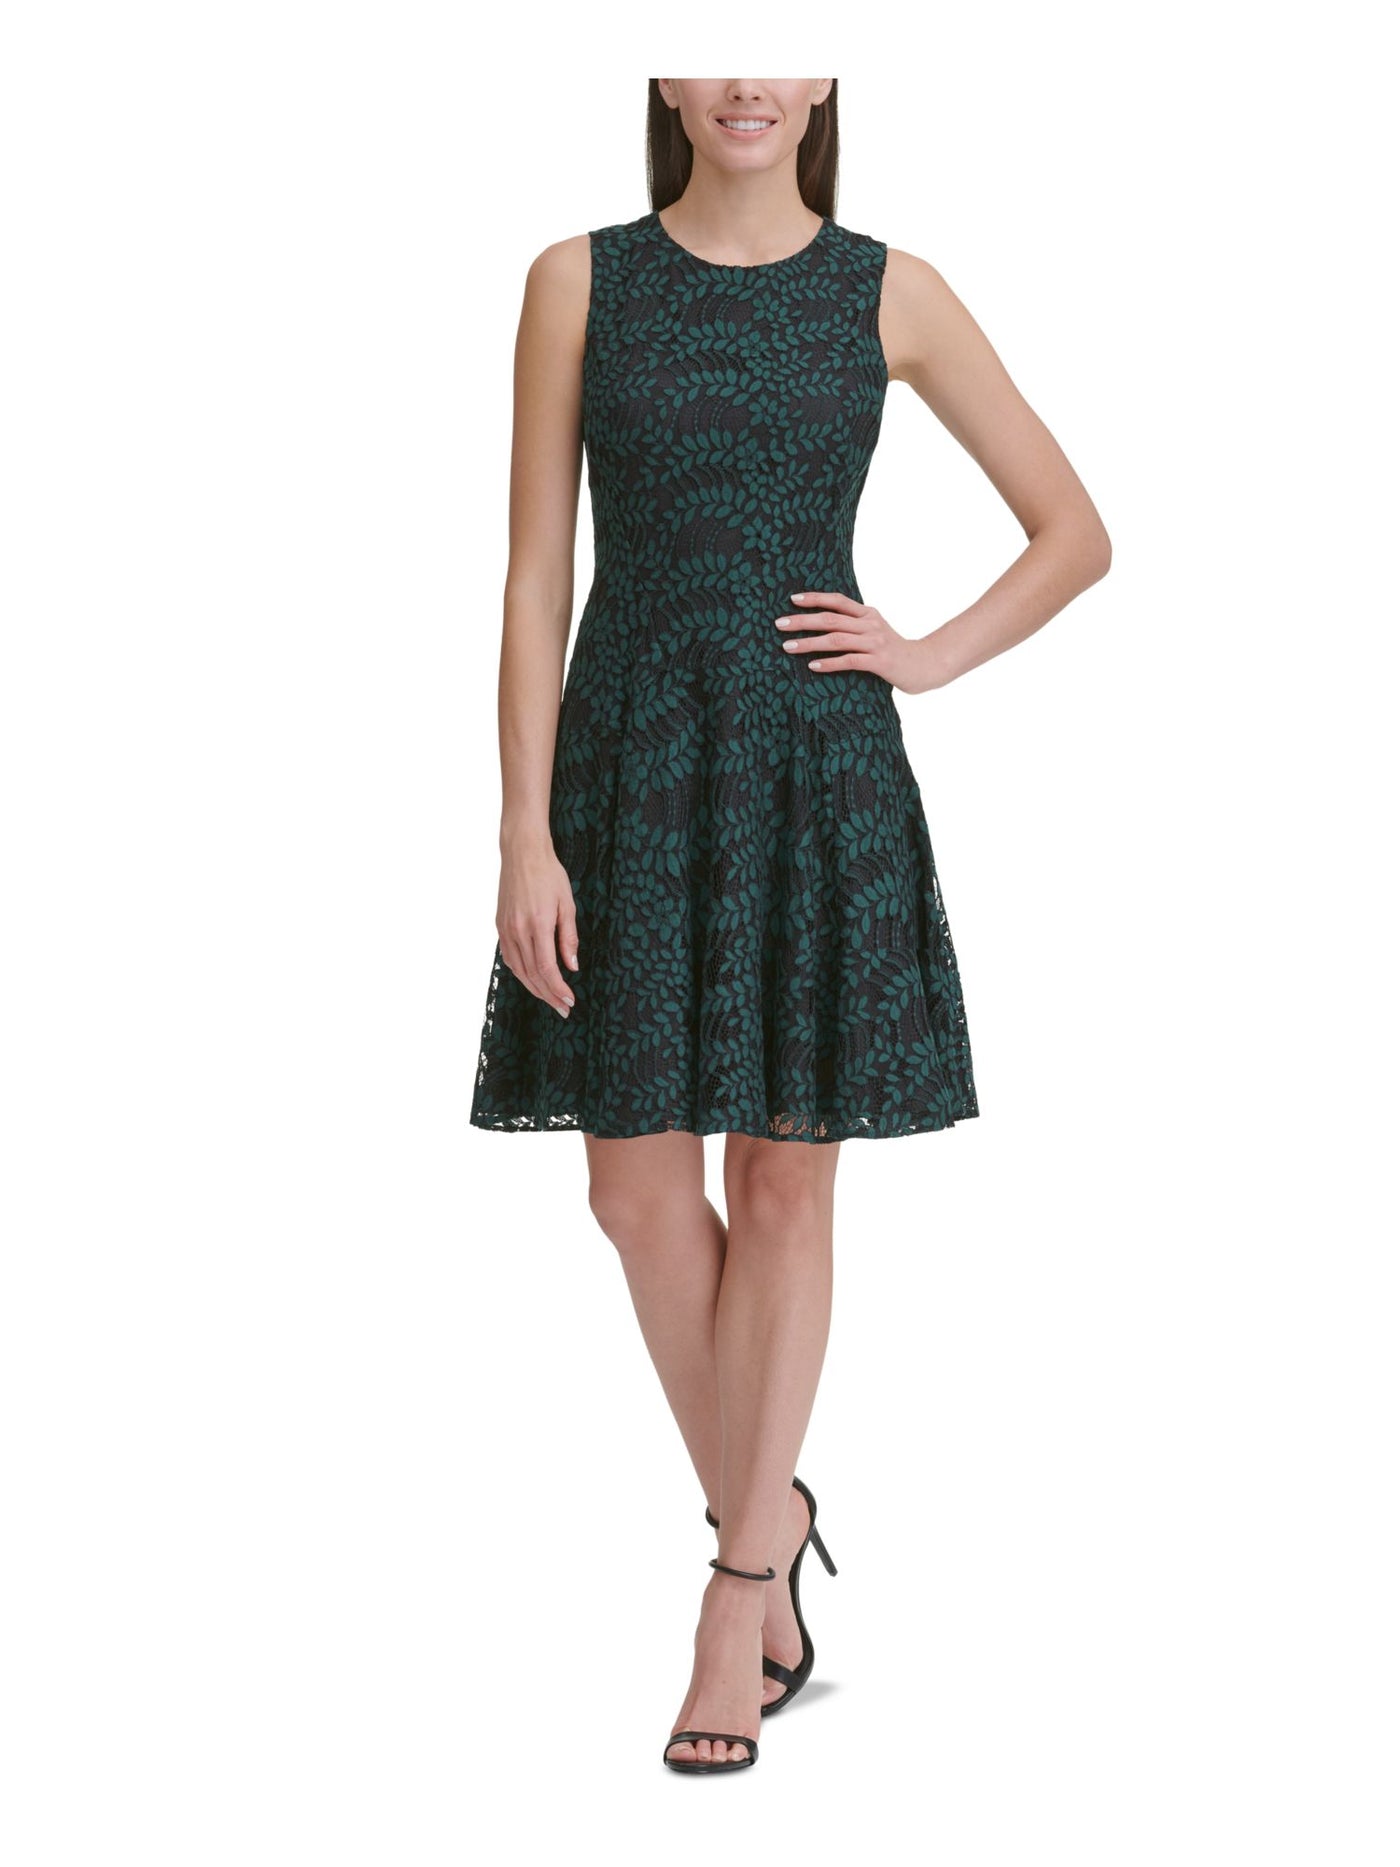 TOMMY HILFIGER Womens Green Floral Sleeveless Jewel Neck Above The Knee Fit + Flare Dress 2